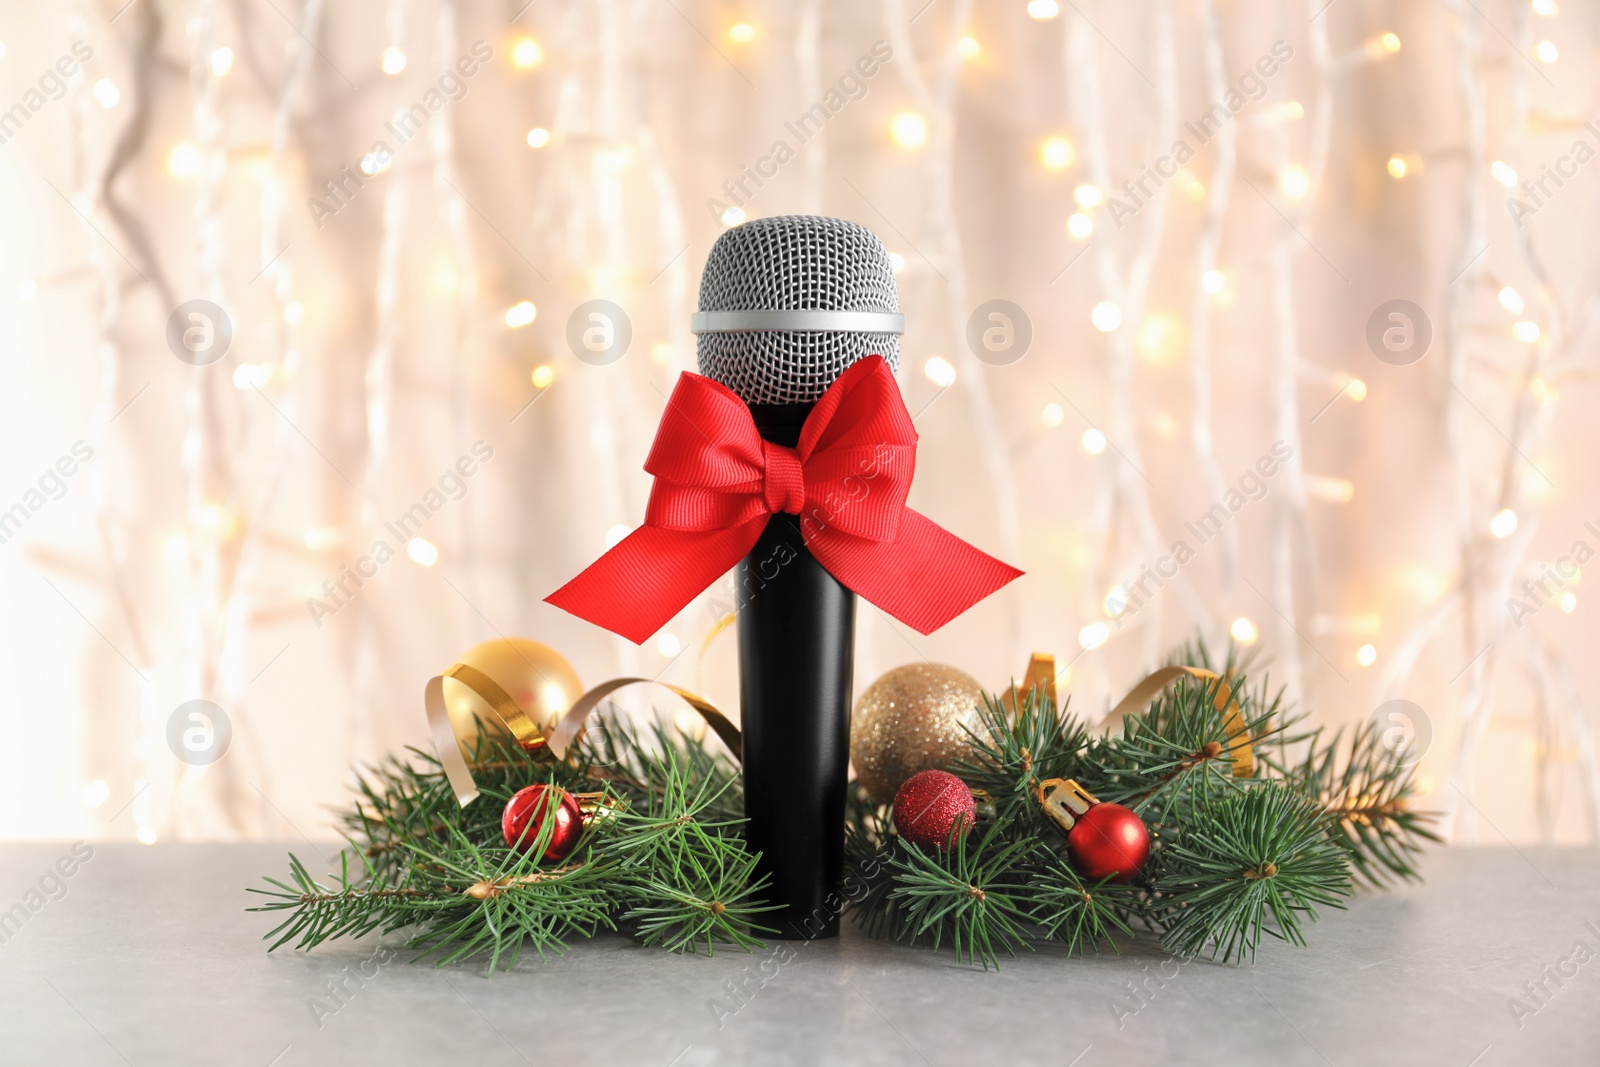 Photo of Microphone with bow and decorations on table against blurred background. Christmas music concept